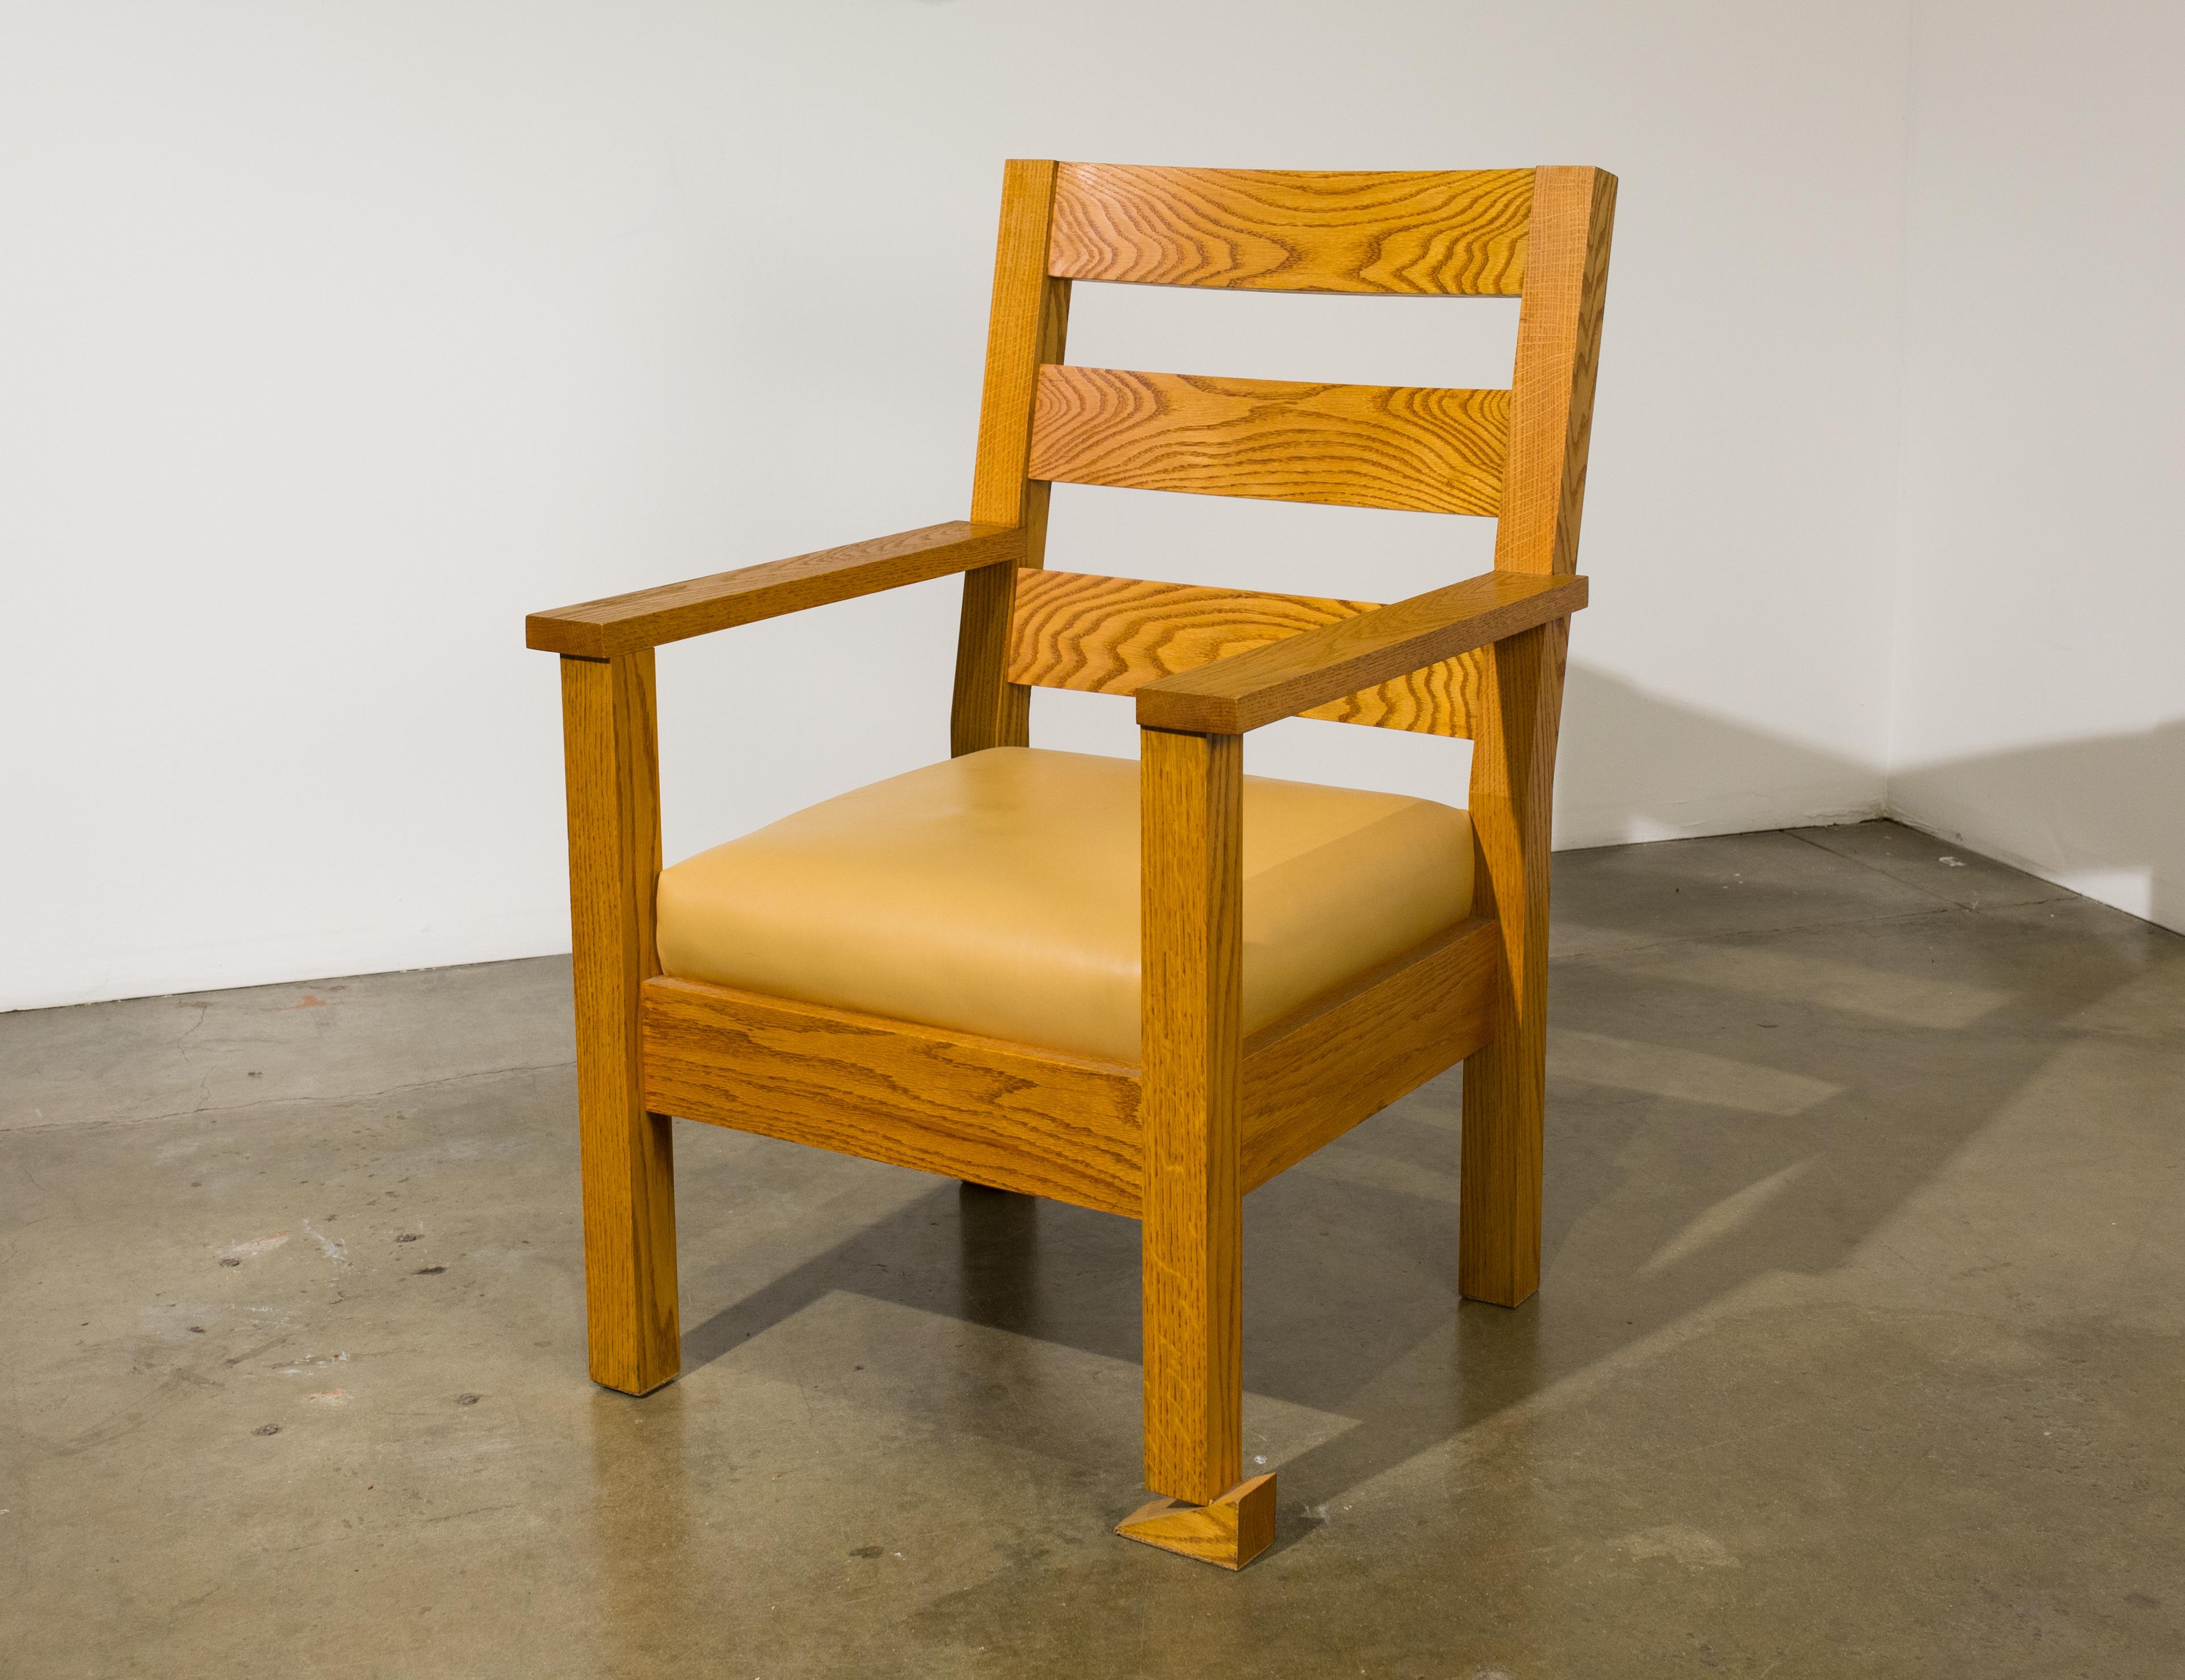 Tony Tasset Abstract Sculpture - Chair (Wedged)